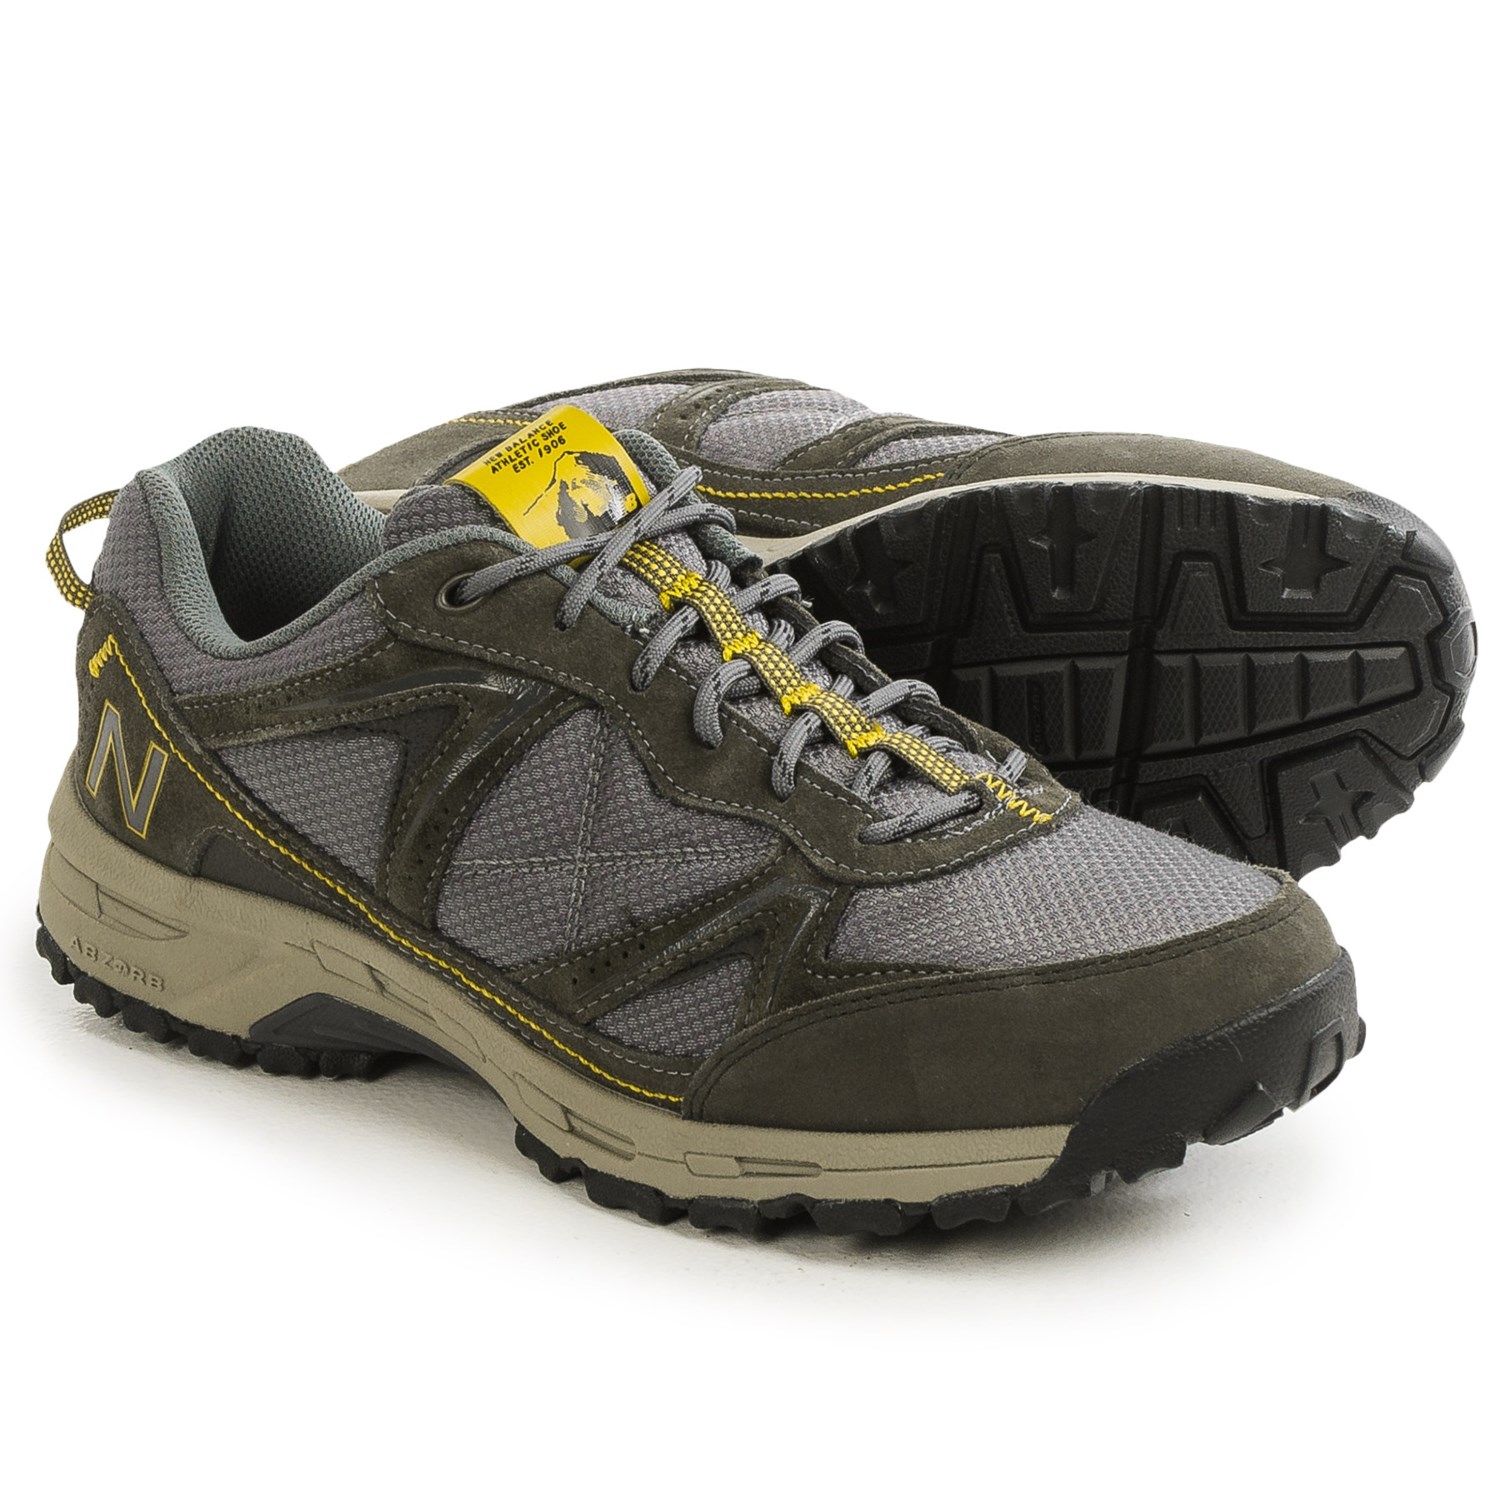 New Balance 659 Hiking Shoes (For Men) - Save 42%